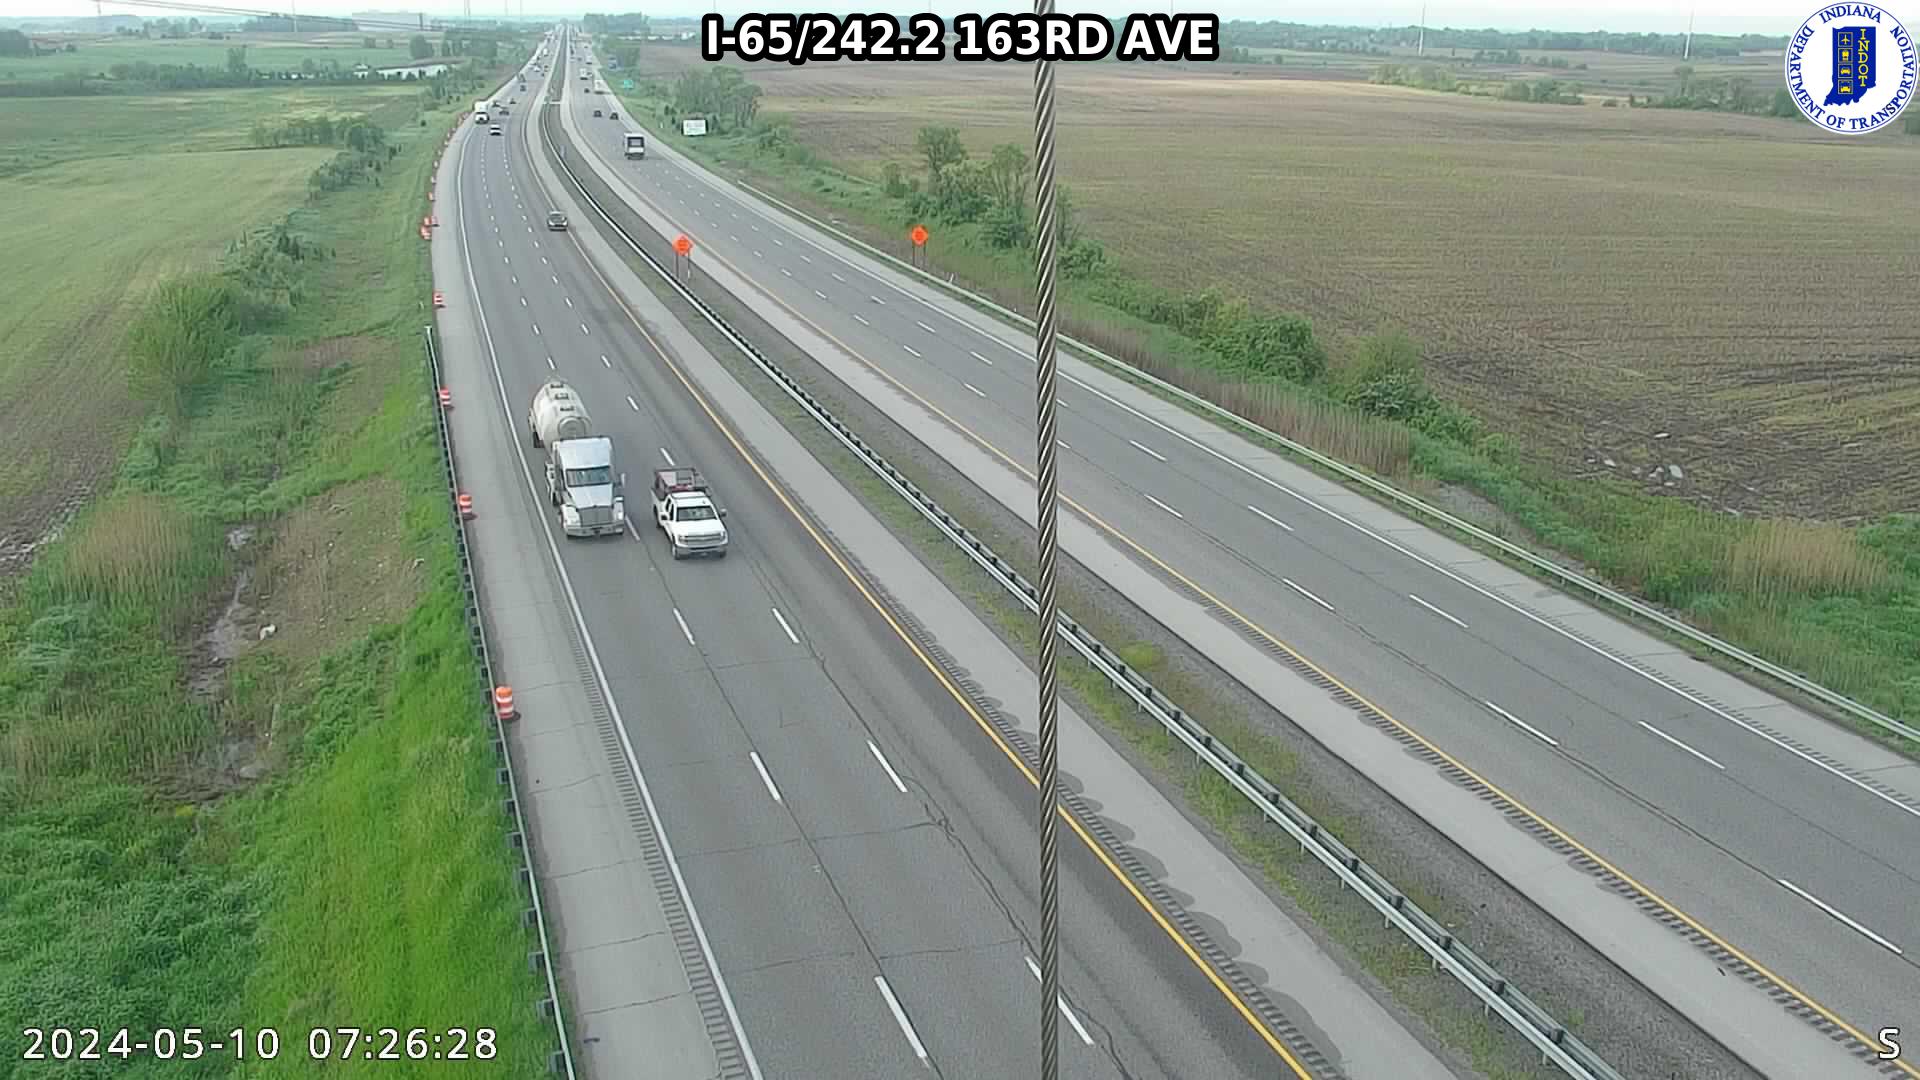 Traffic Cam NB I-65 at 153rd Ave (-1.3 miles) Player